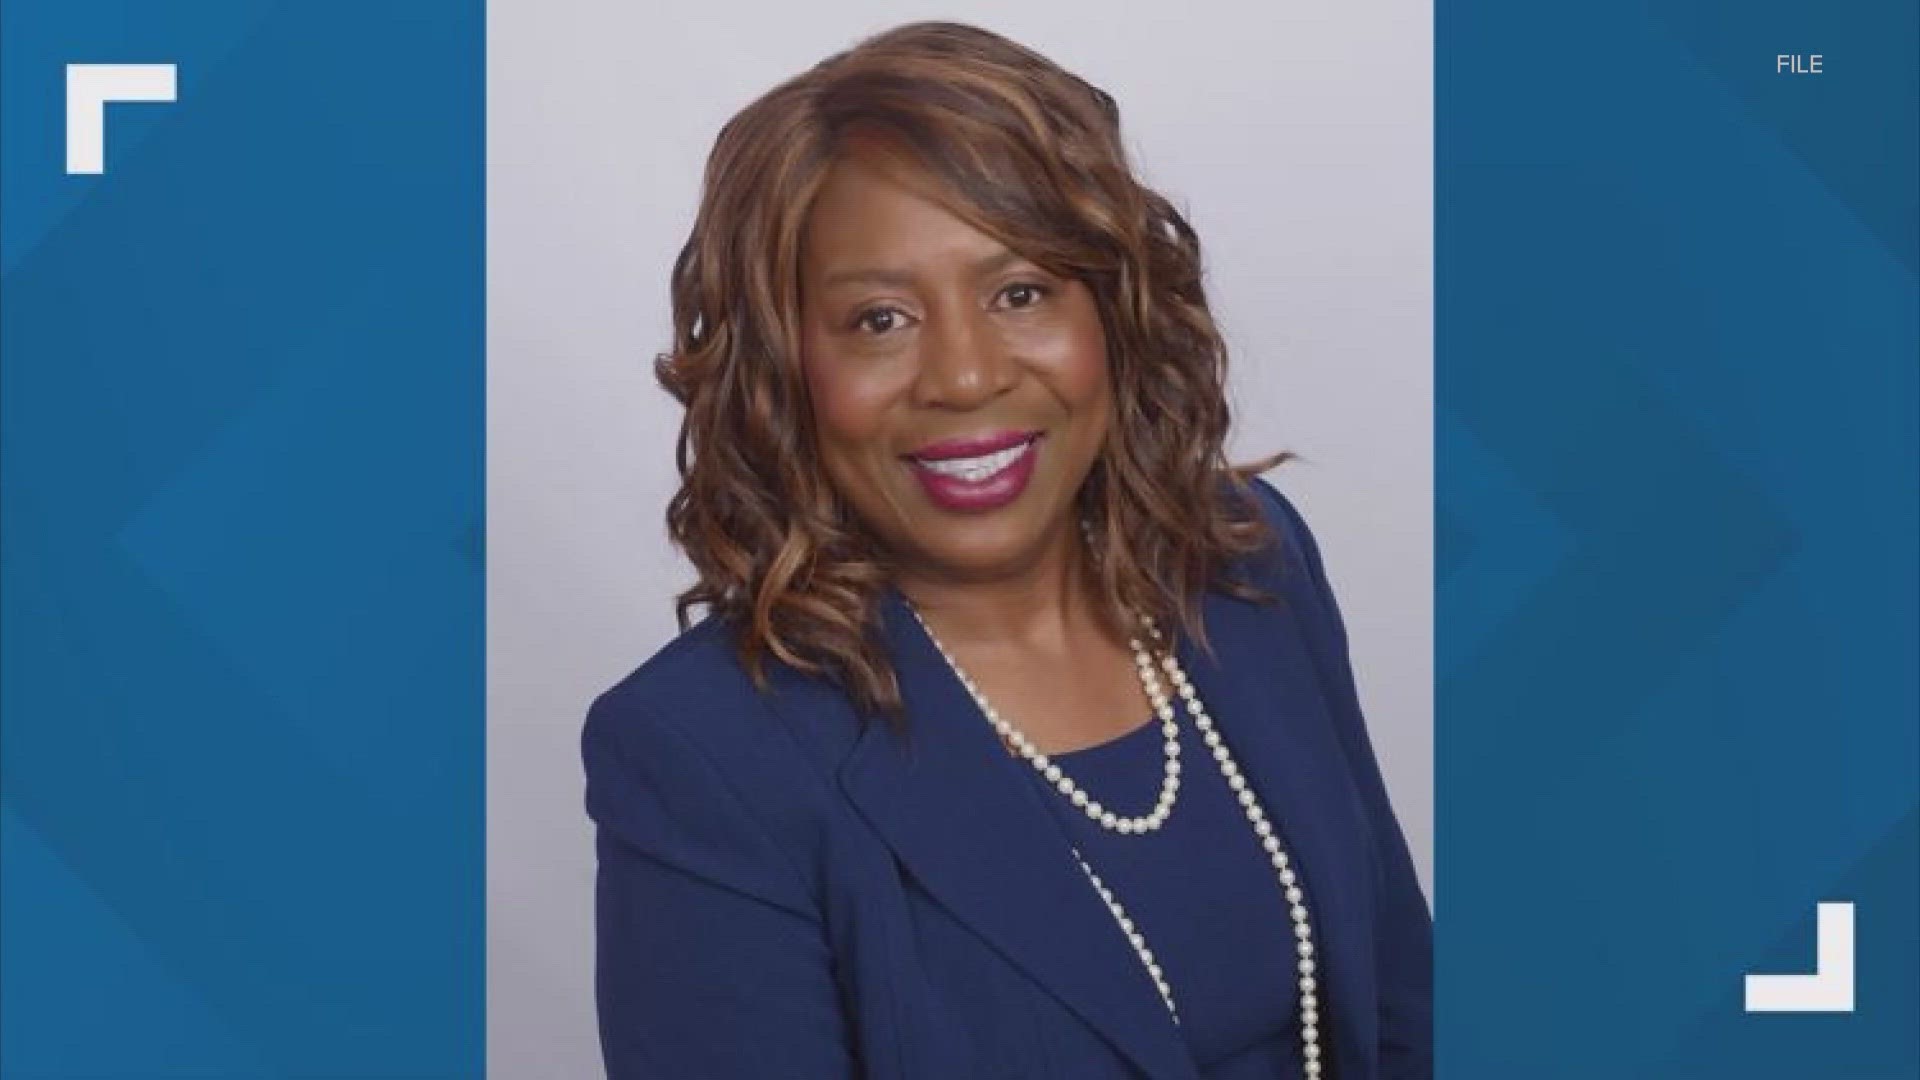 Dr. Karen Johnson was the first director of the state Office of Equity from March 2021 until earlier this month.